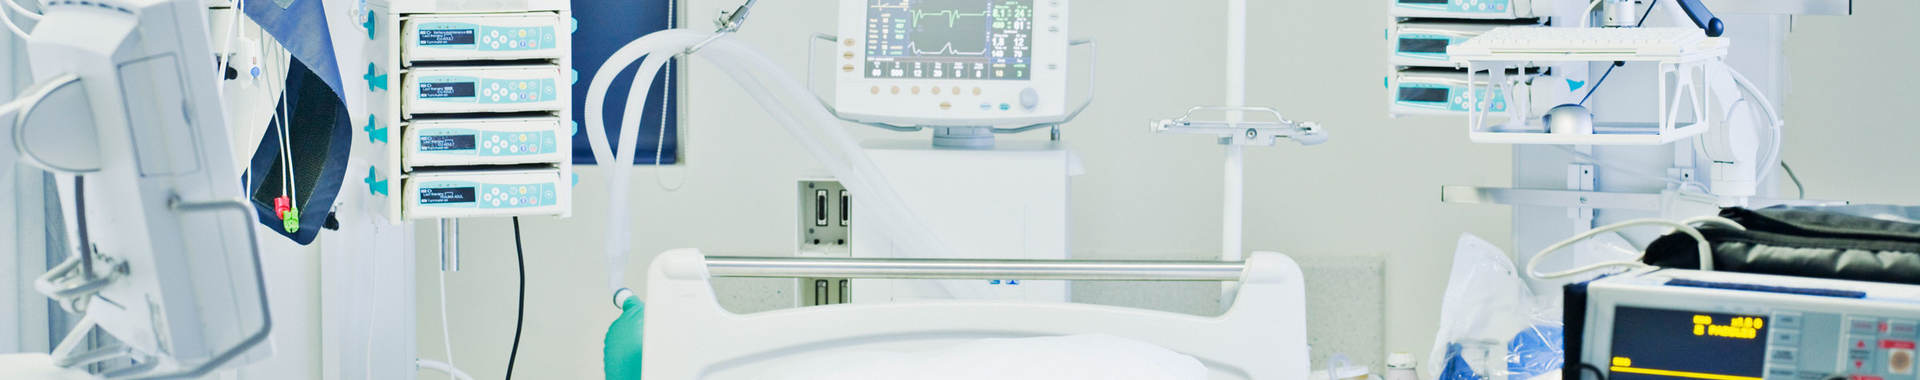 Medical equipment and monitors lined up in a hospital room